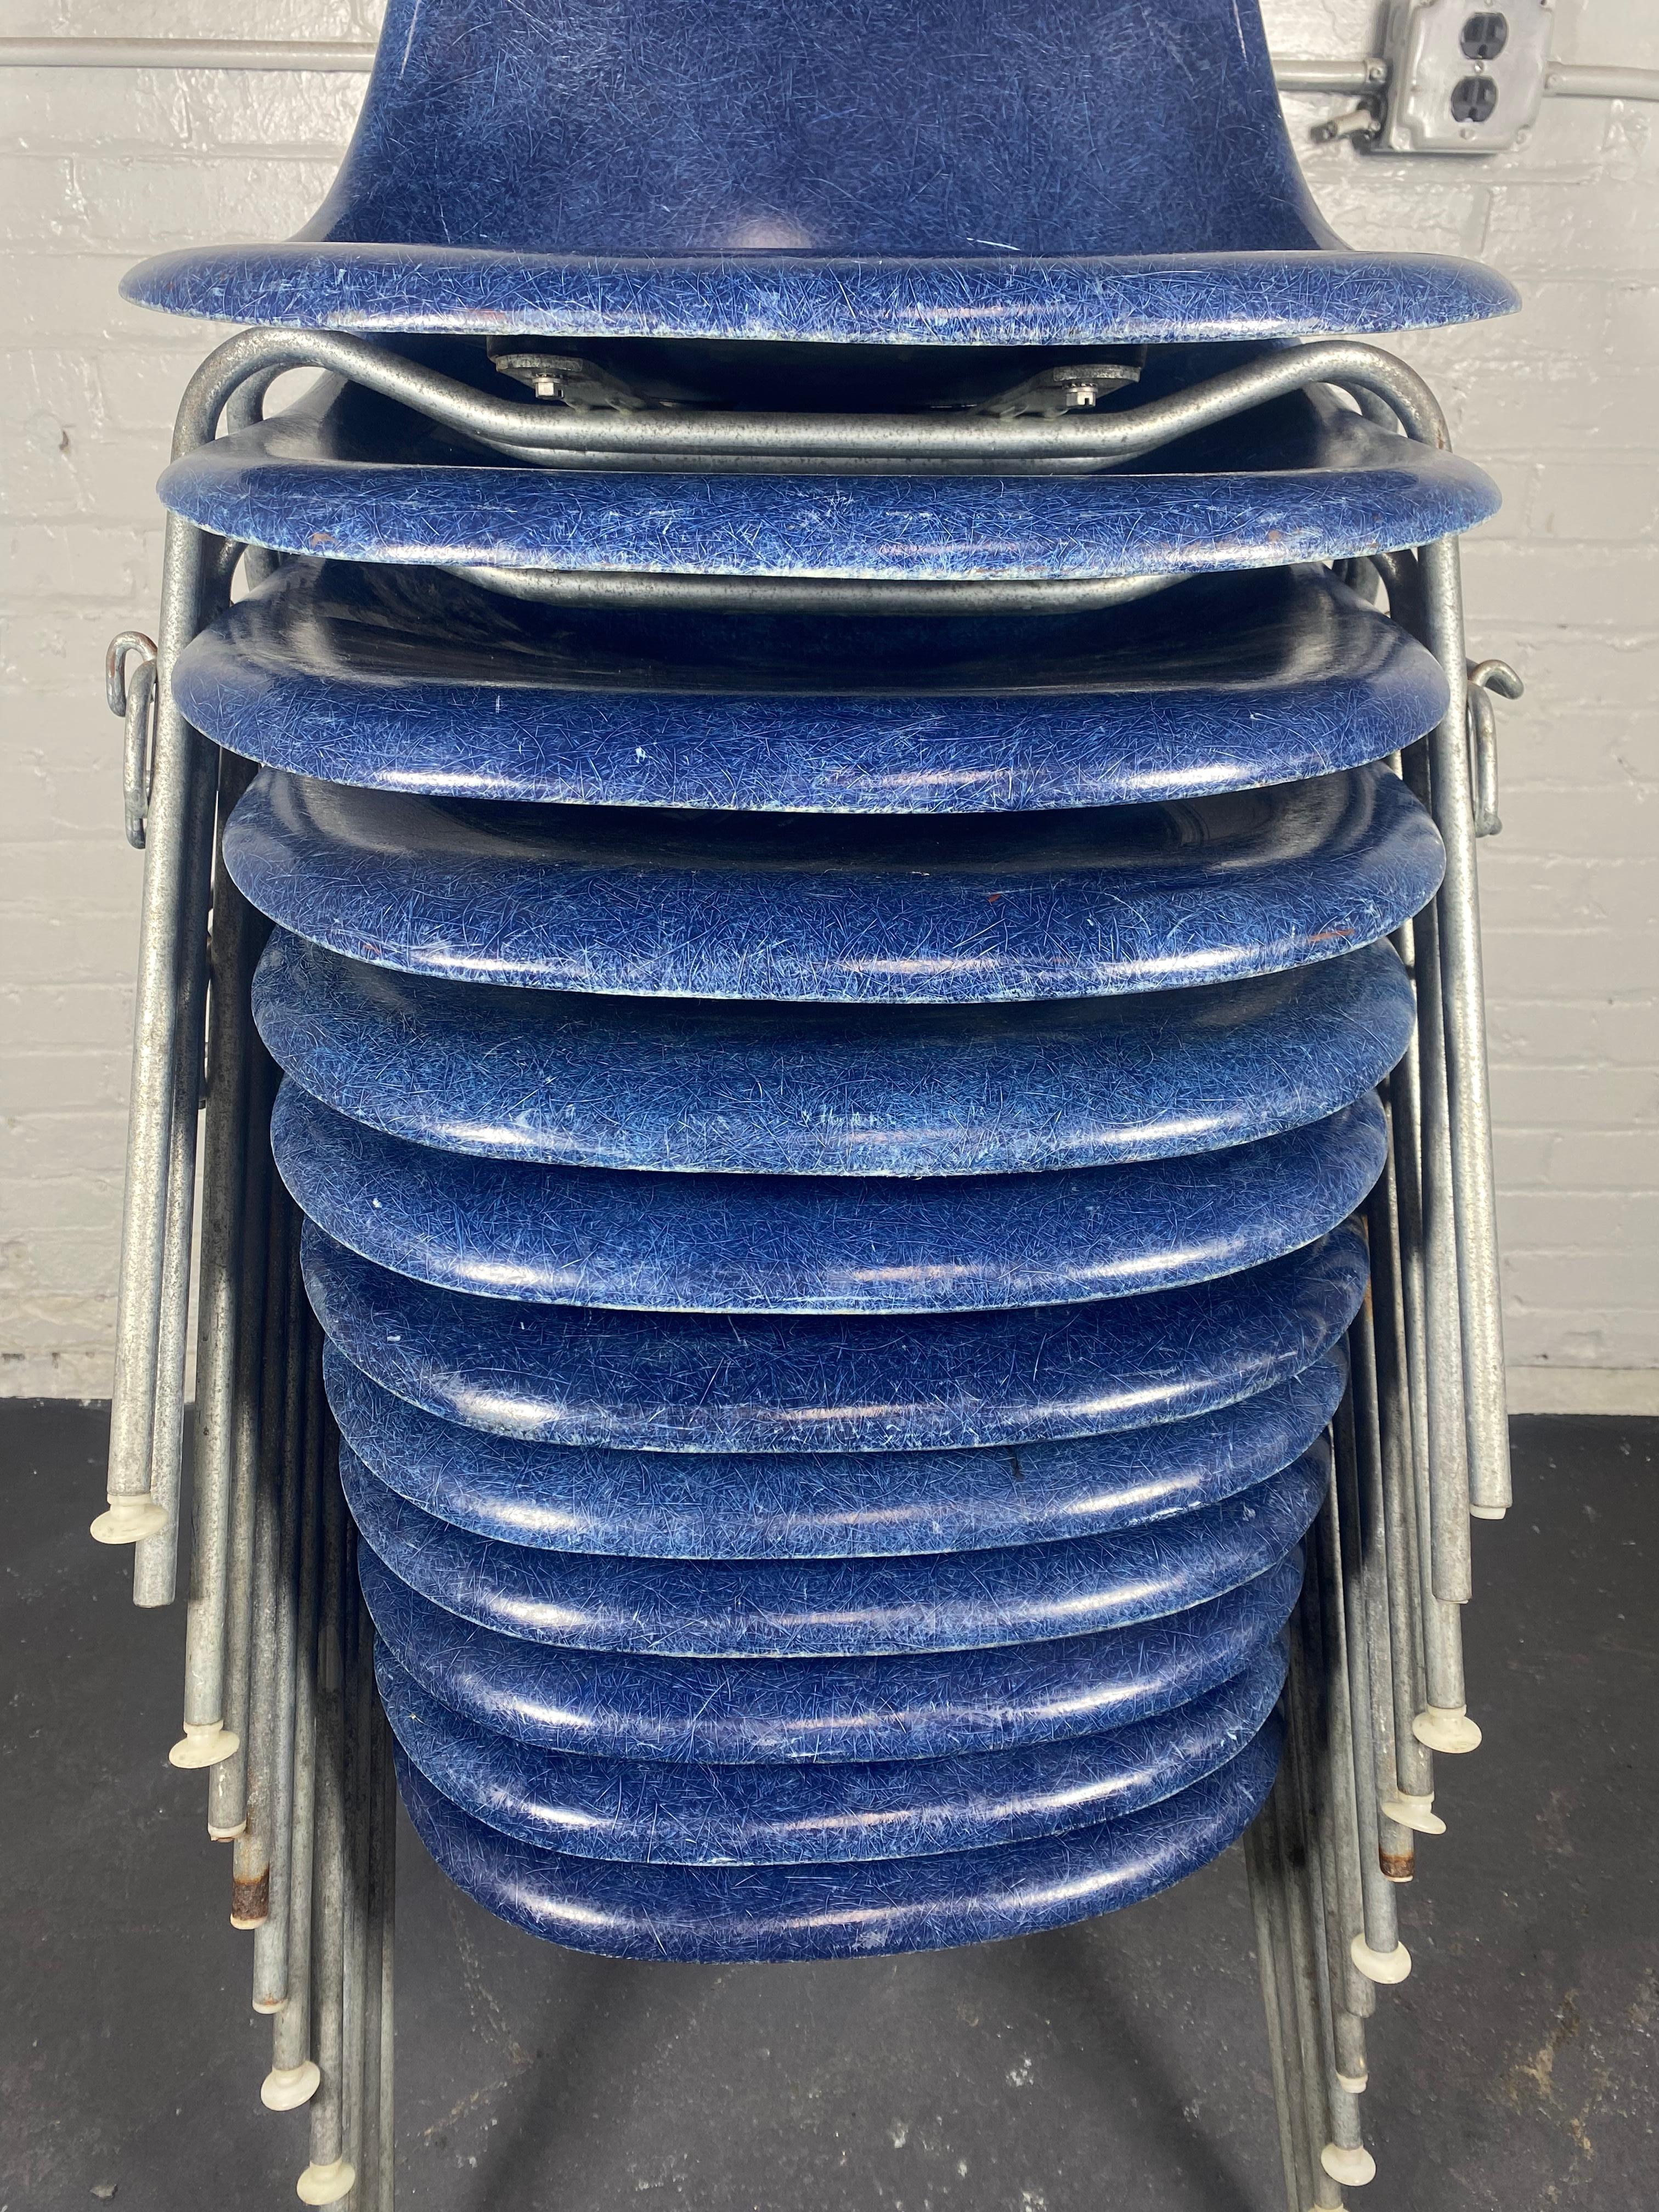 12 DSS Stacking Chairs Charles & Ray Eames Herman Miller, Blue Fiberglass, 1960s For Sale 2